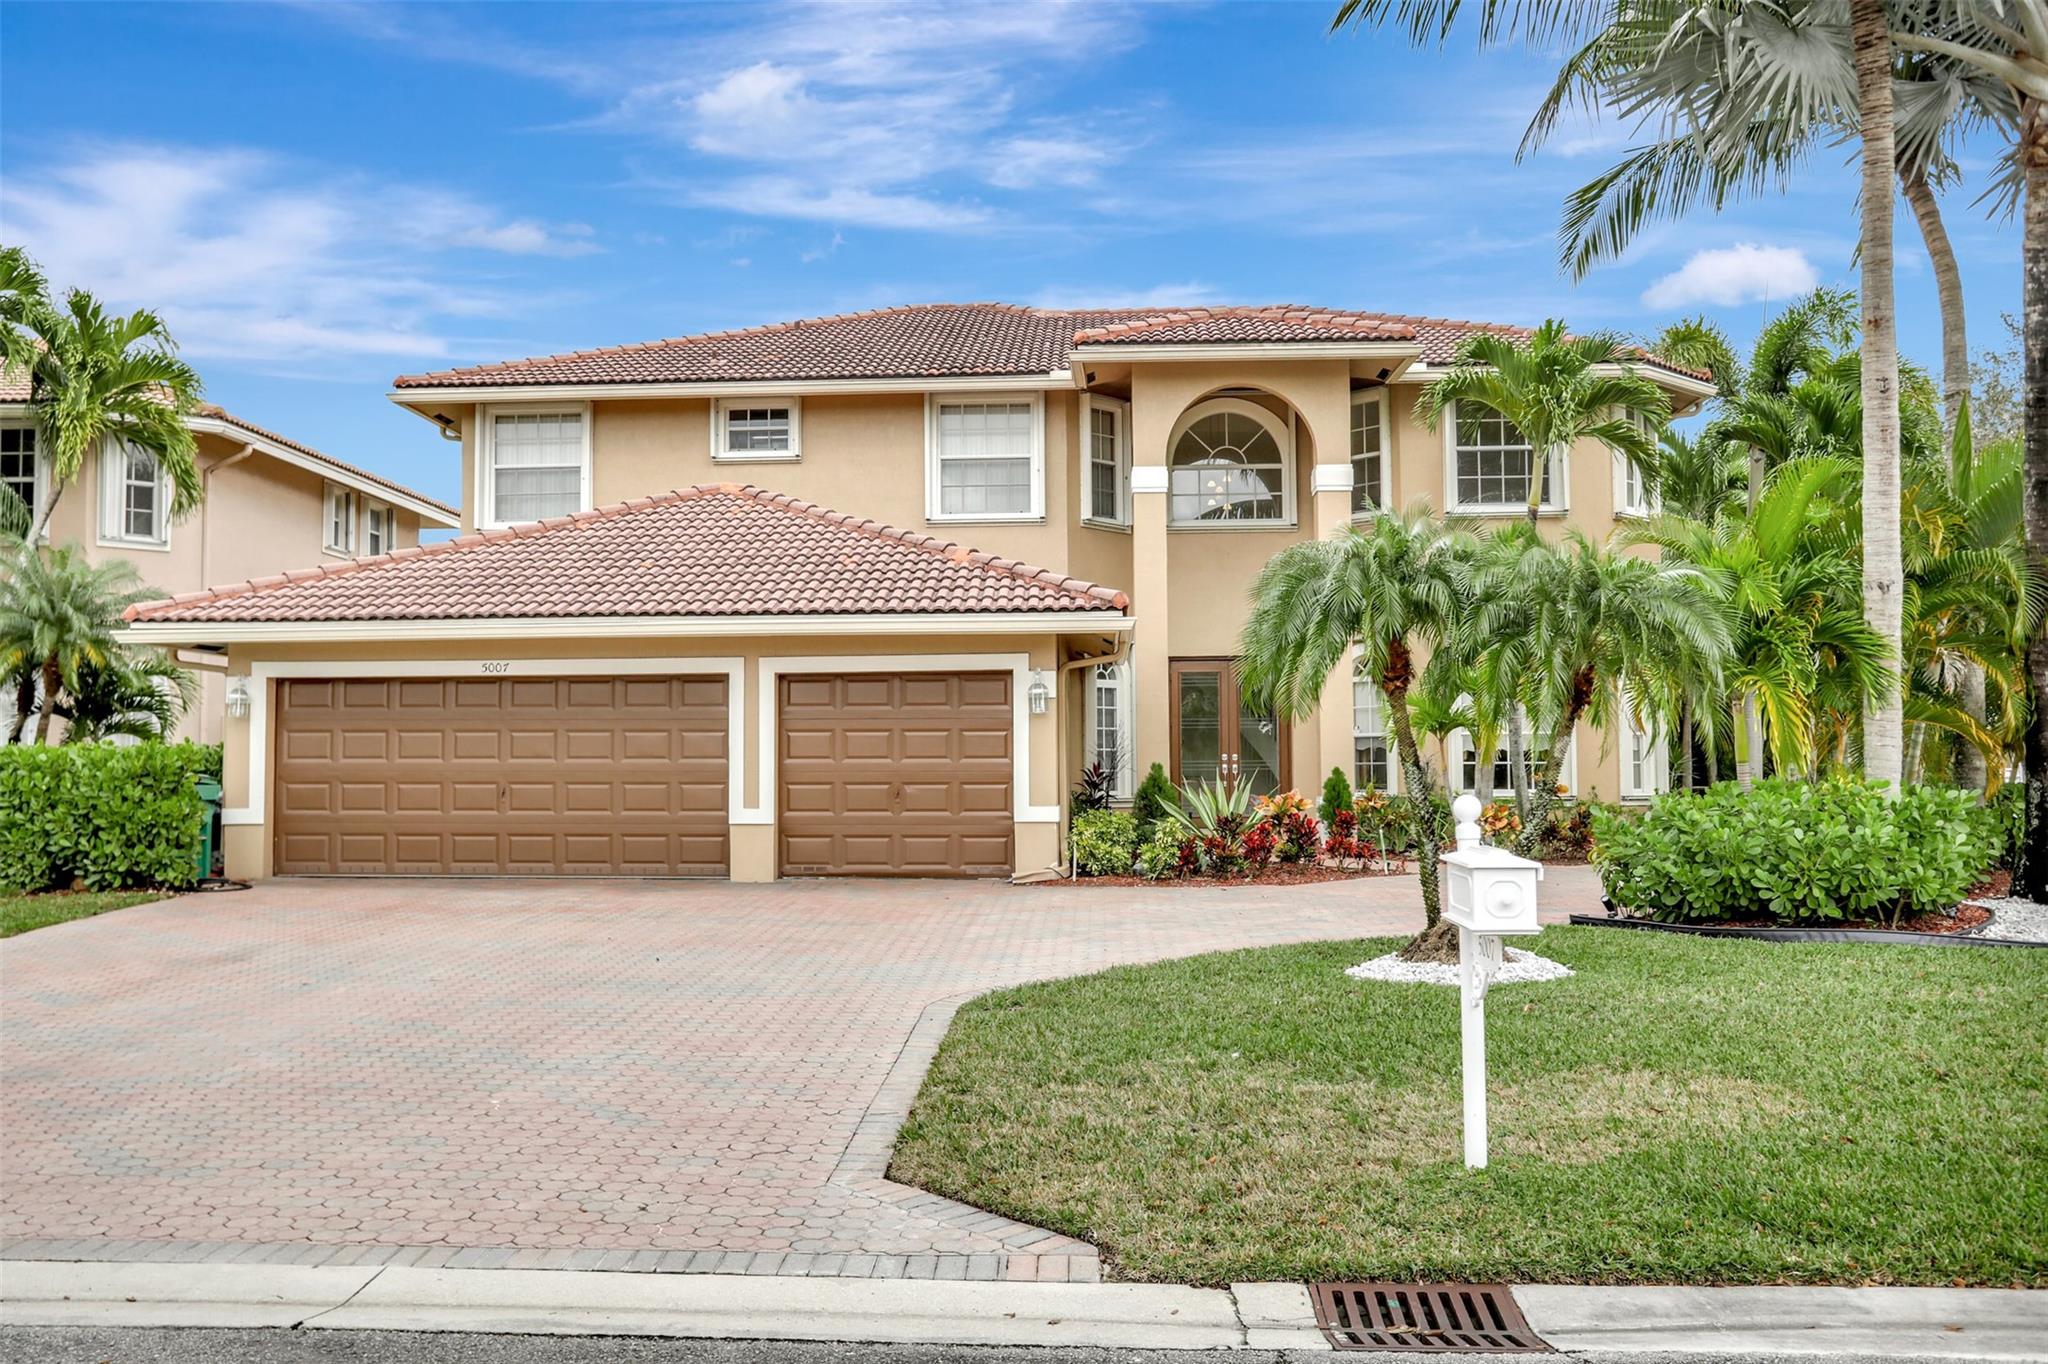 5007 NW 124th Way, Coral Springs, FL 